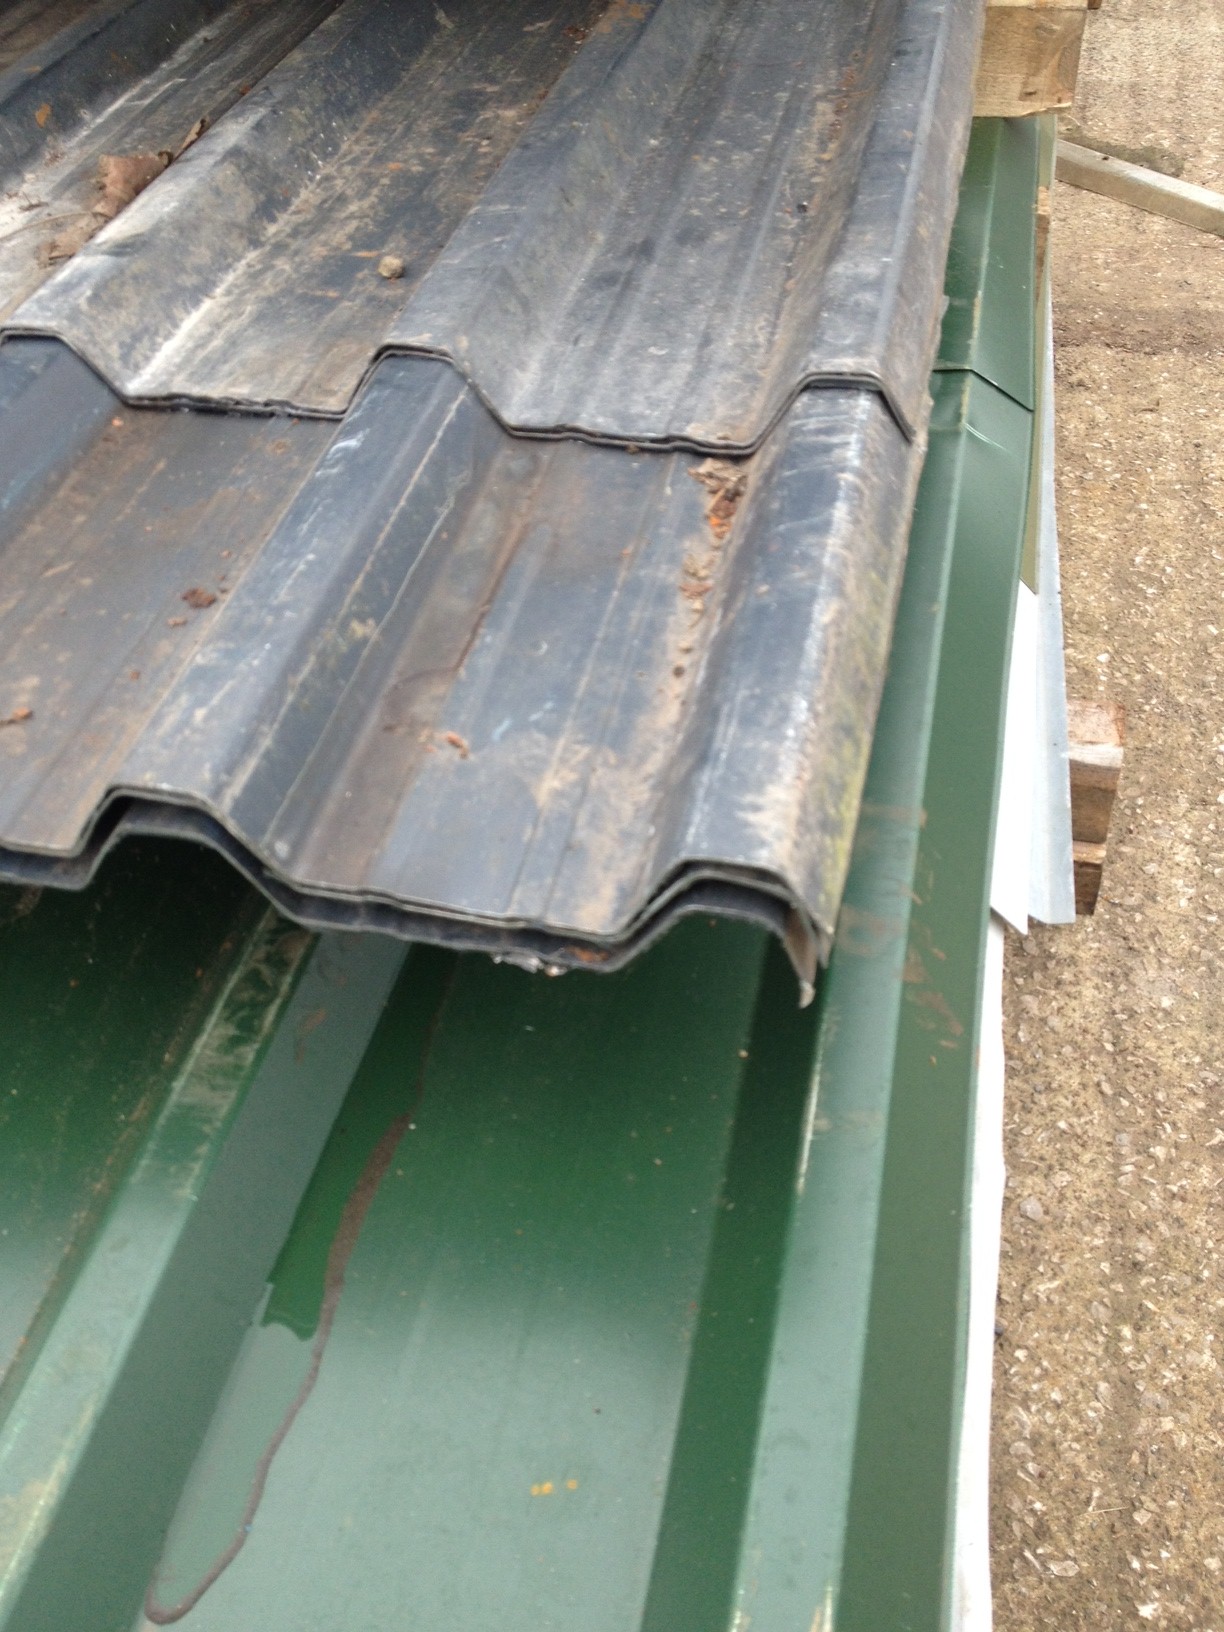 14 Ft X 800 Mm 0.700 Blue/black Second Hand Roofing Sheets eBay